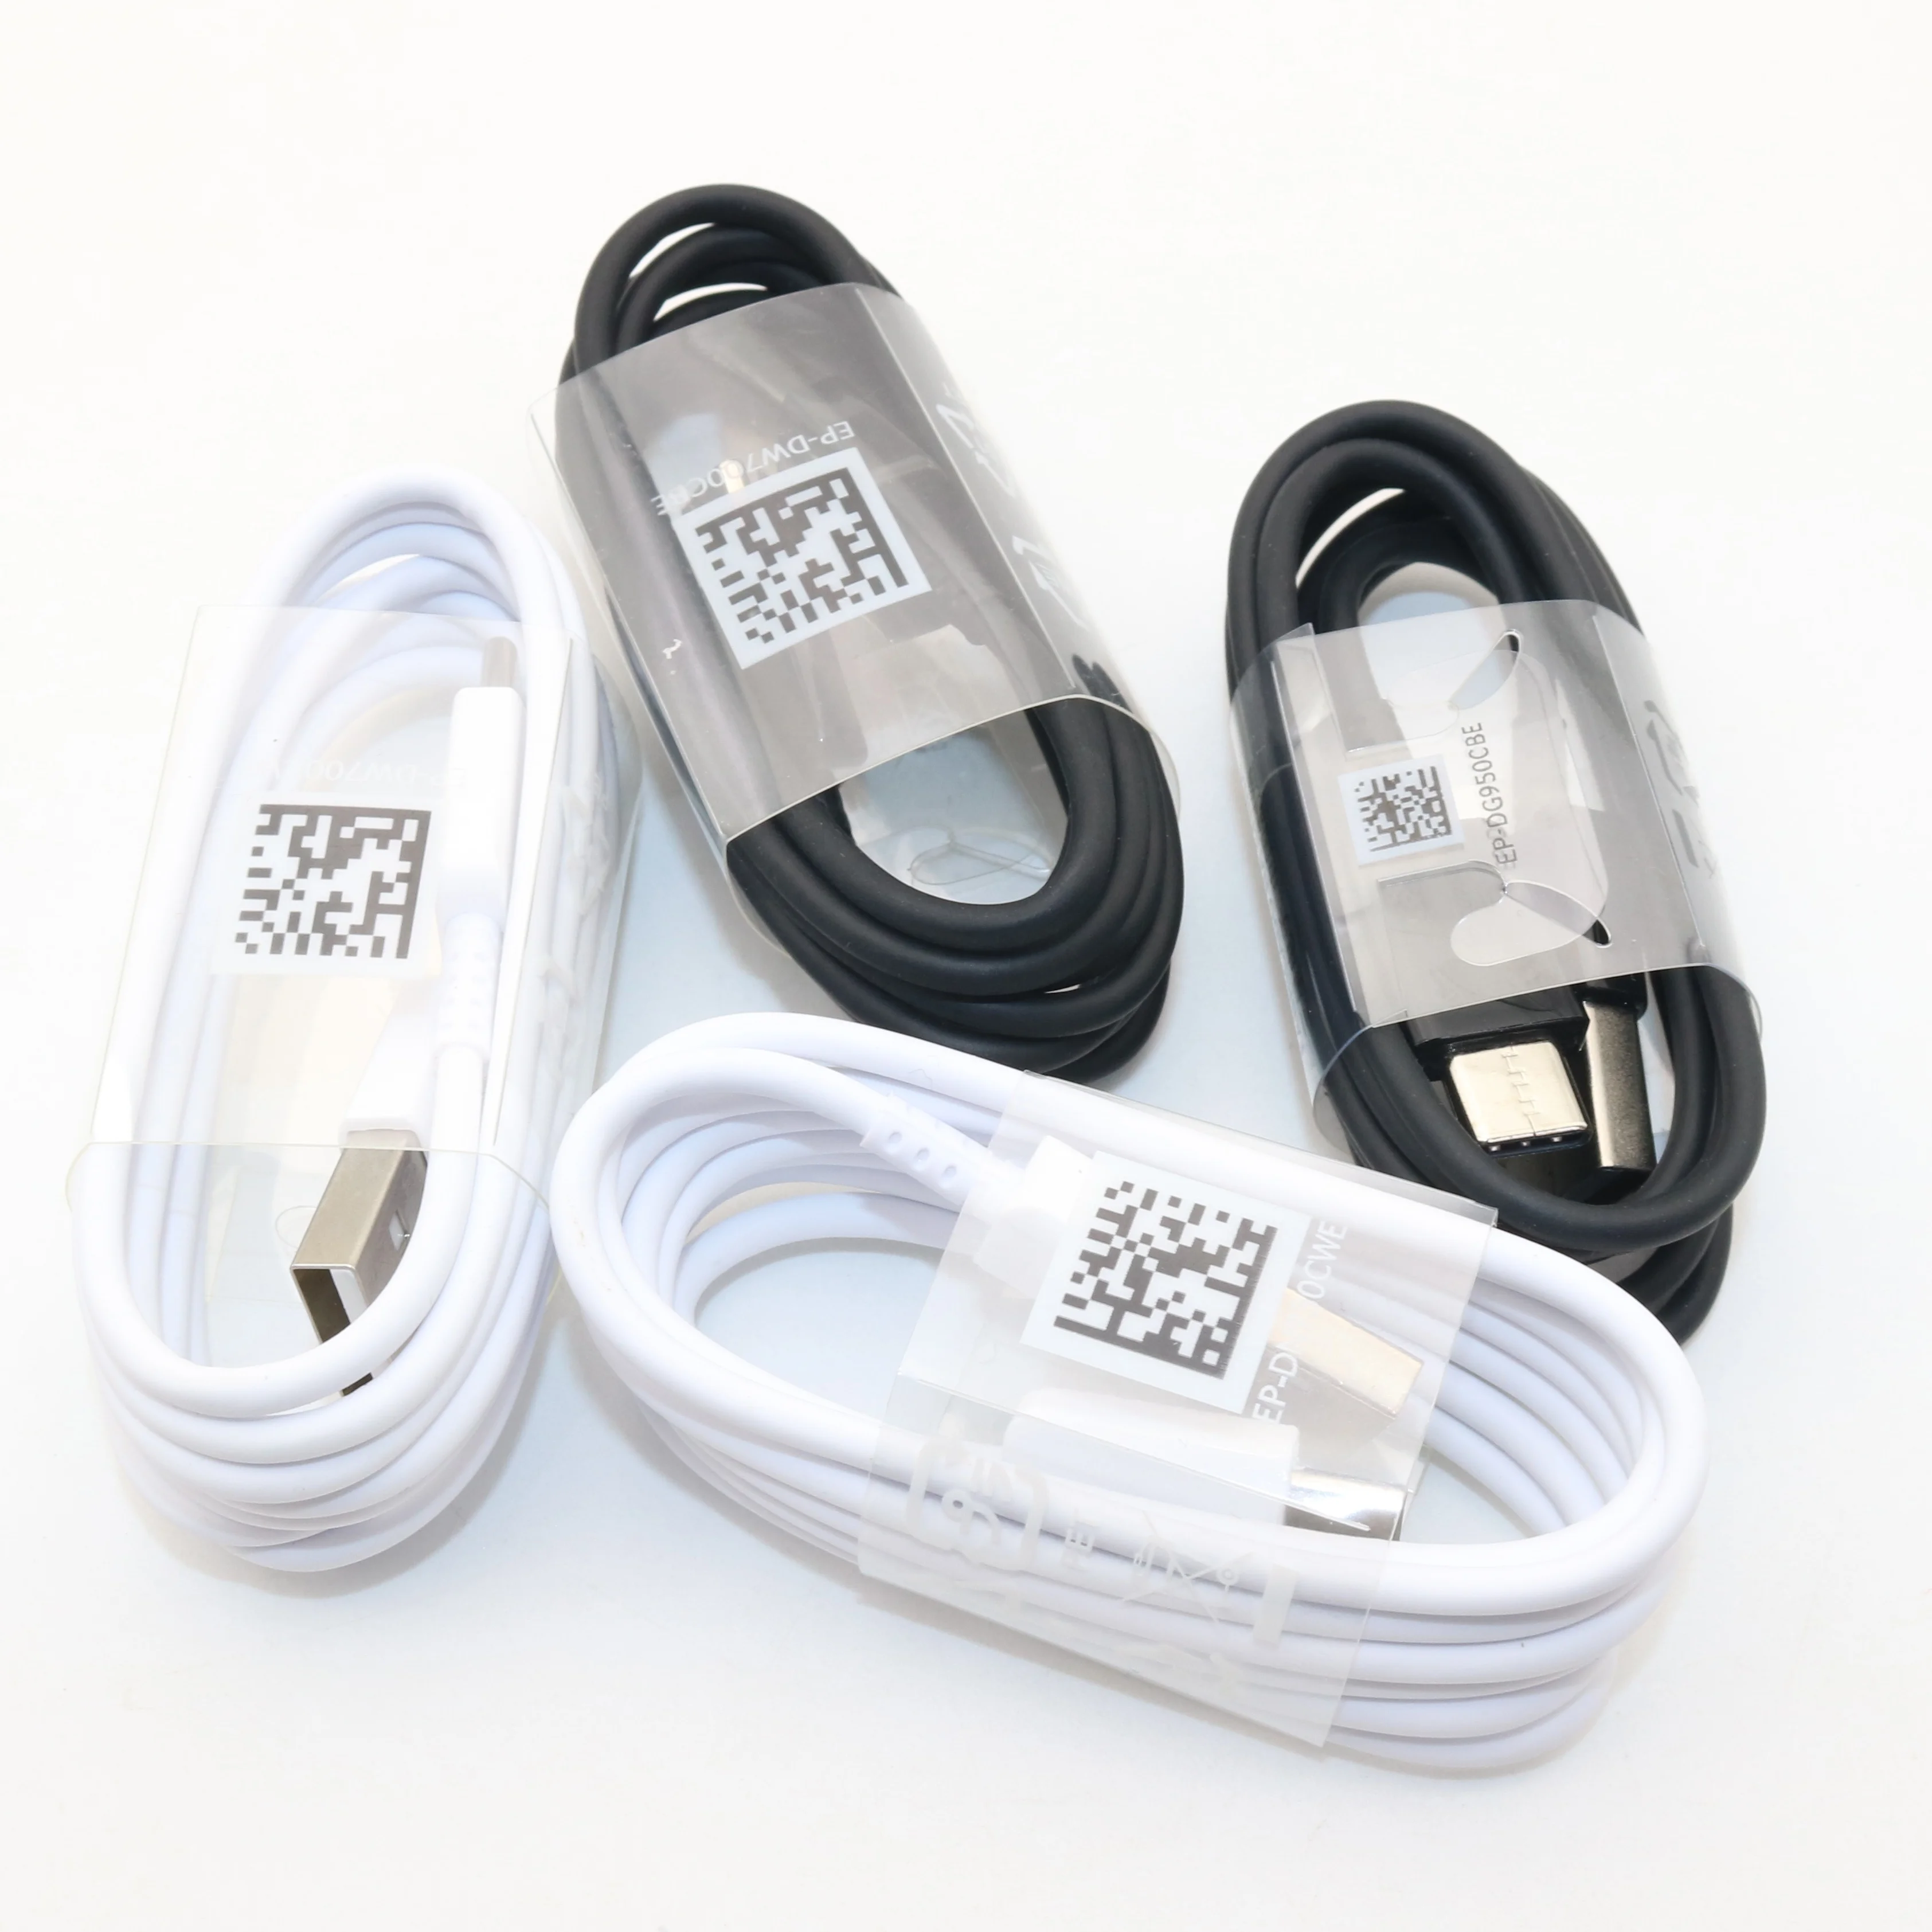 

For Samsung S8 S9 S10 Type C Cable Usb 3.0 Telephone Cable Fast Charging Original, Black, white